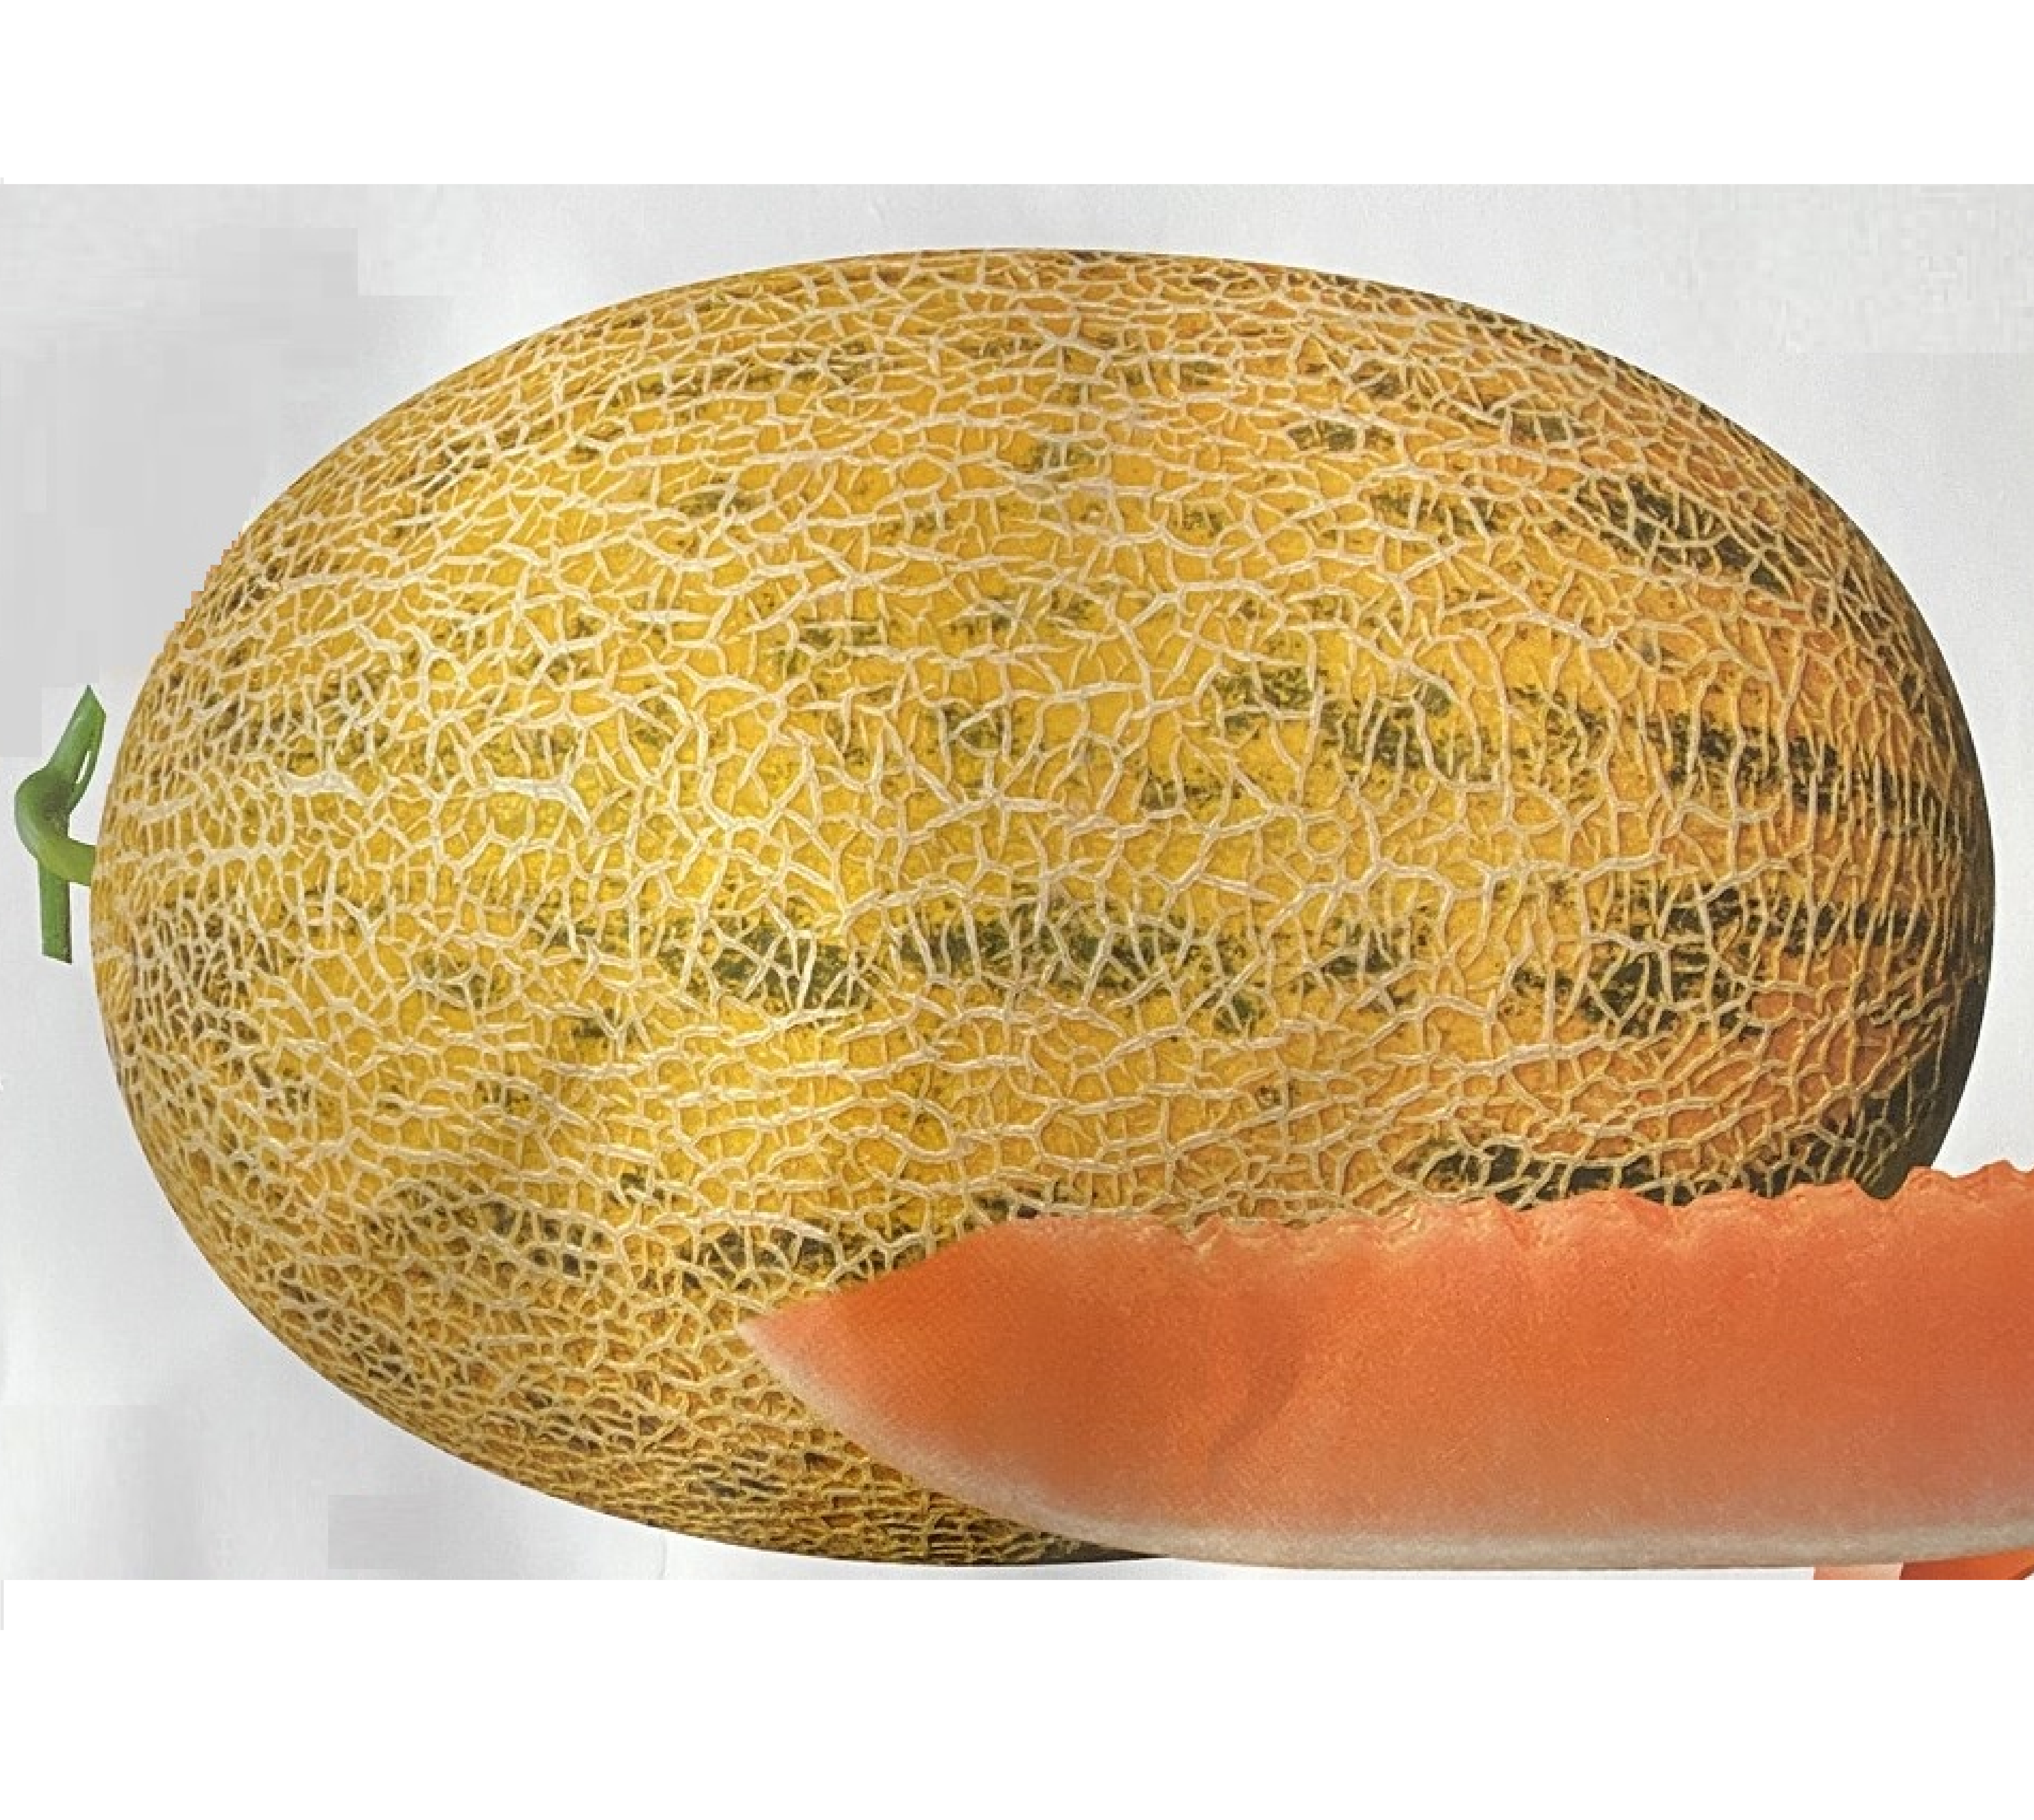 Wholesale China Yellow Skin Watermelon Seeds Factories –  High quality melon seeds for wholesale  – Shuangxing